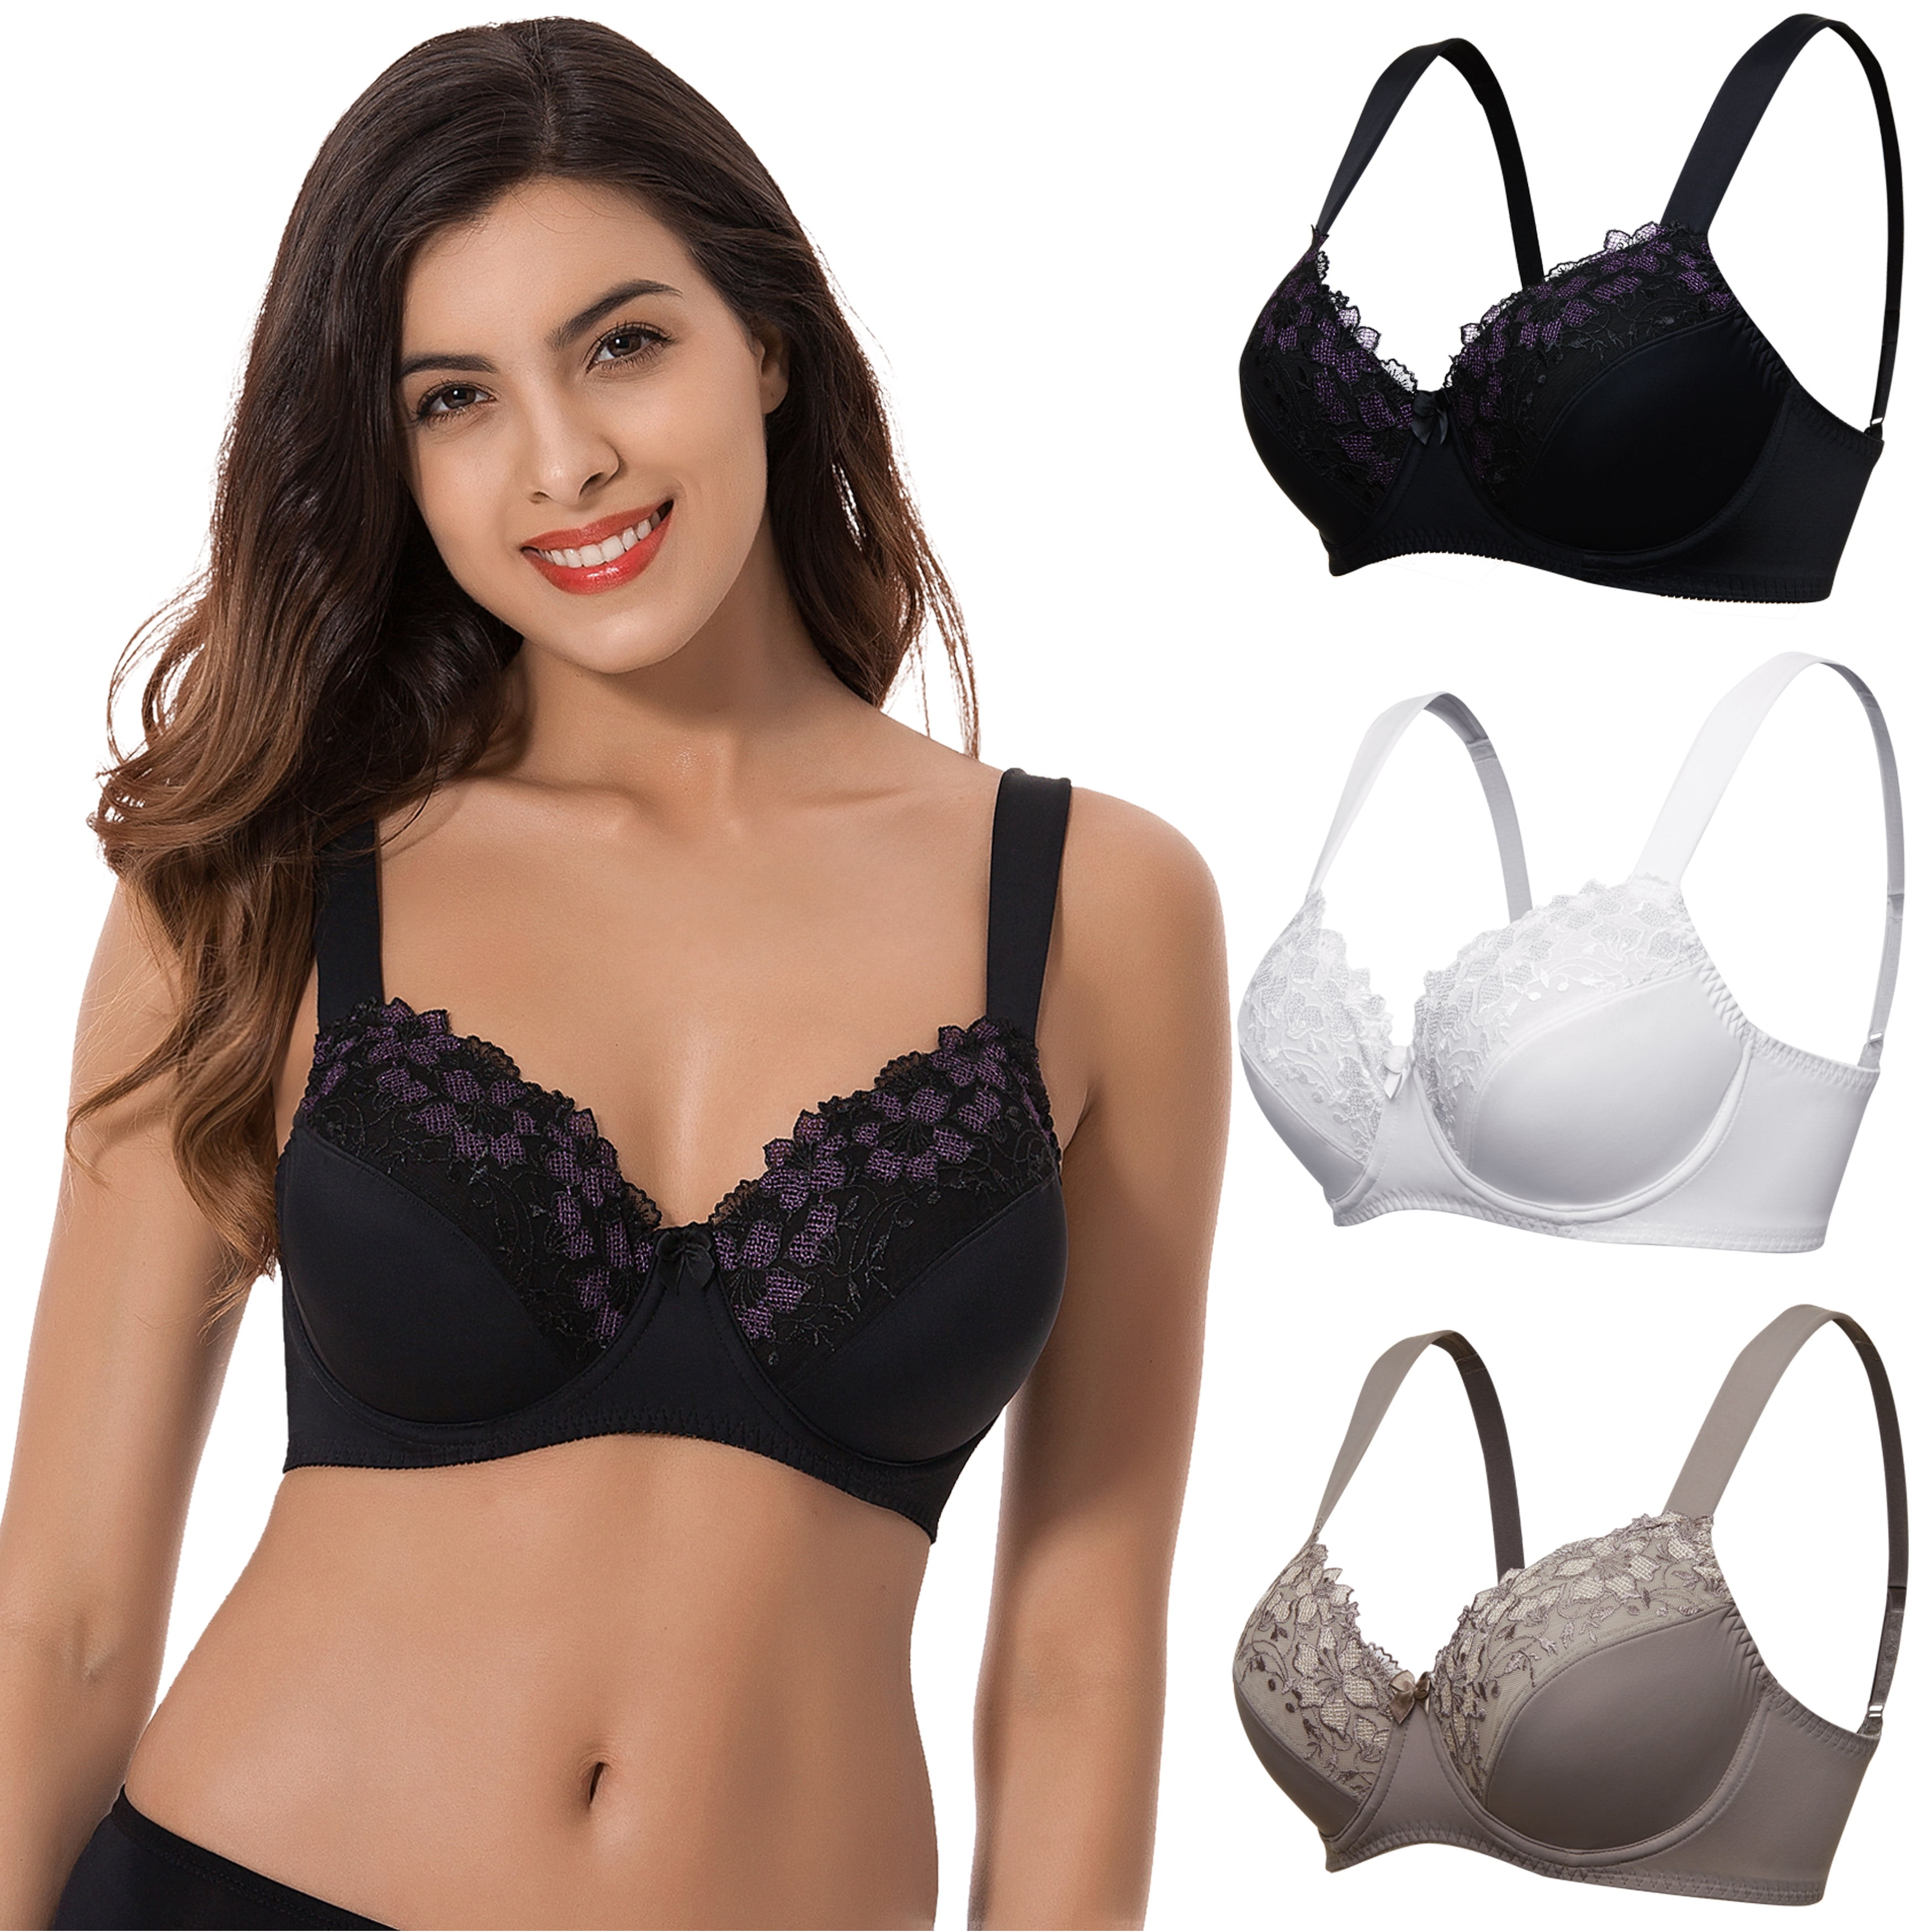 Curve Muse Womens Plus Size Full Coverage Light Lift Push Up Underwire Lace Bras-1 or 2PK